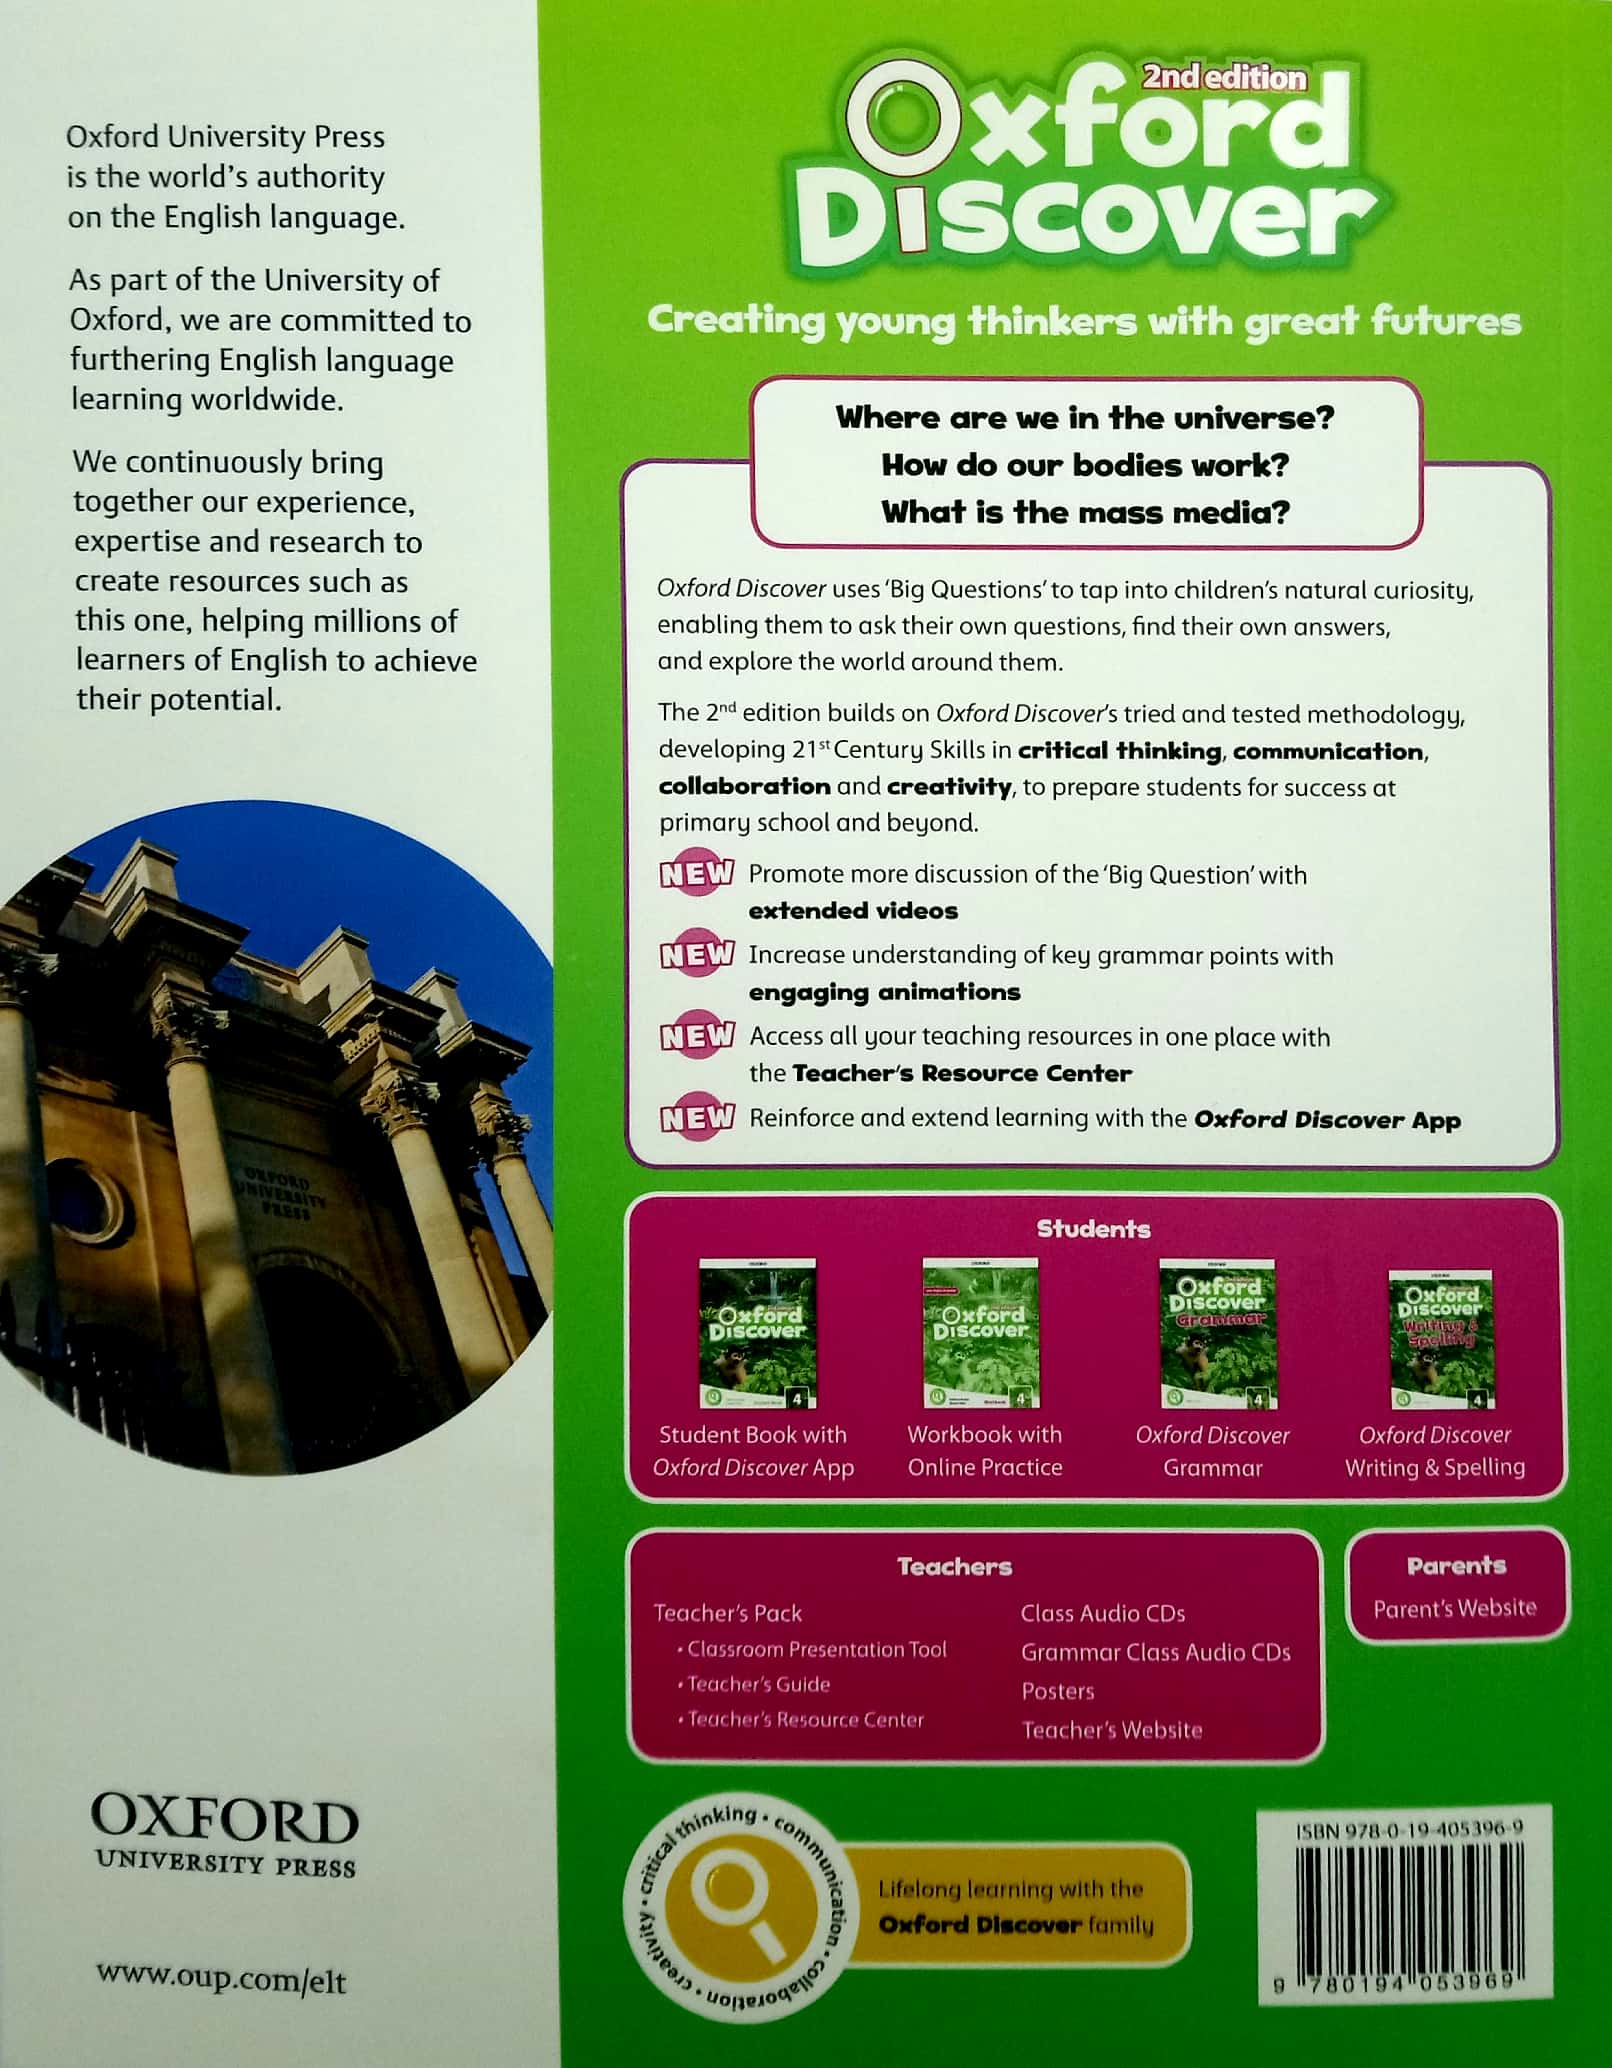 Oxford Discover: Level 4: Student Book Pack